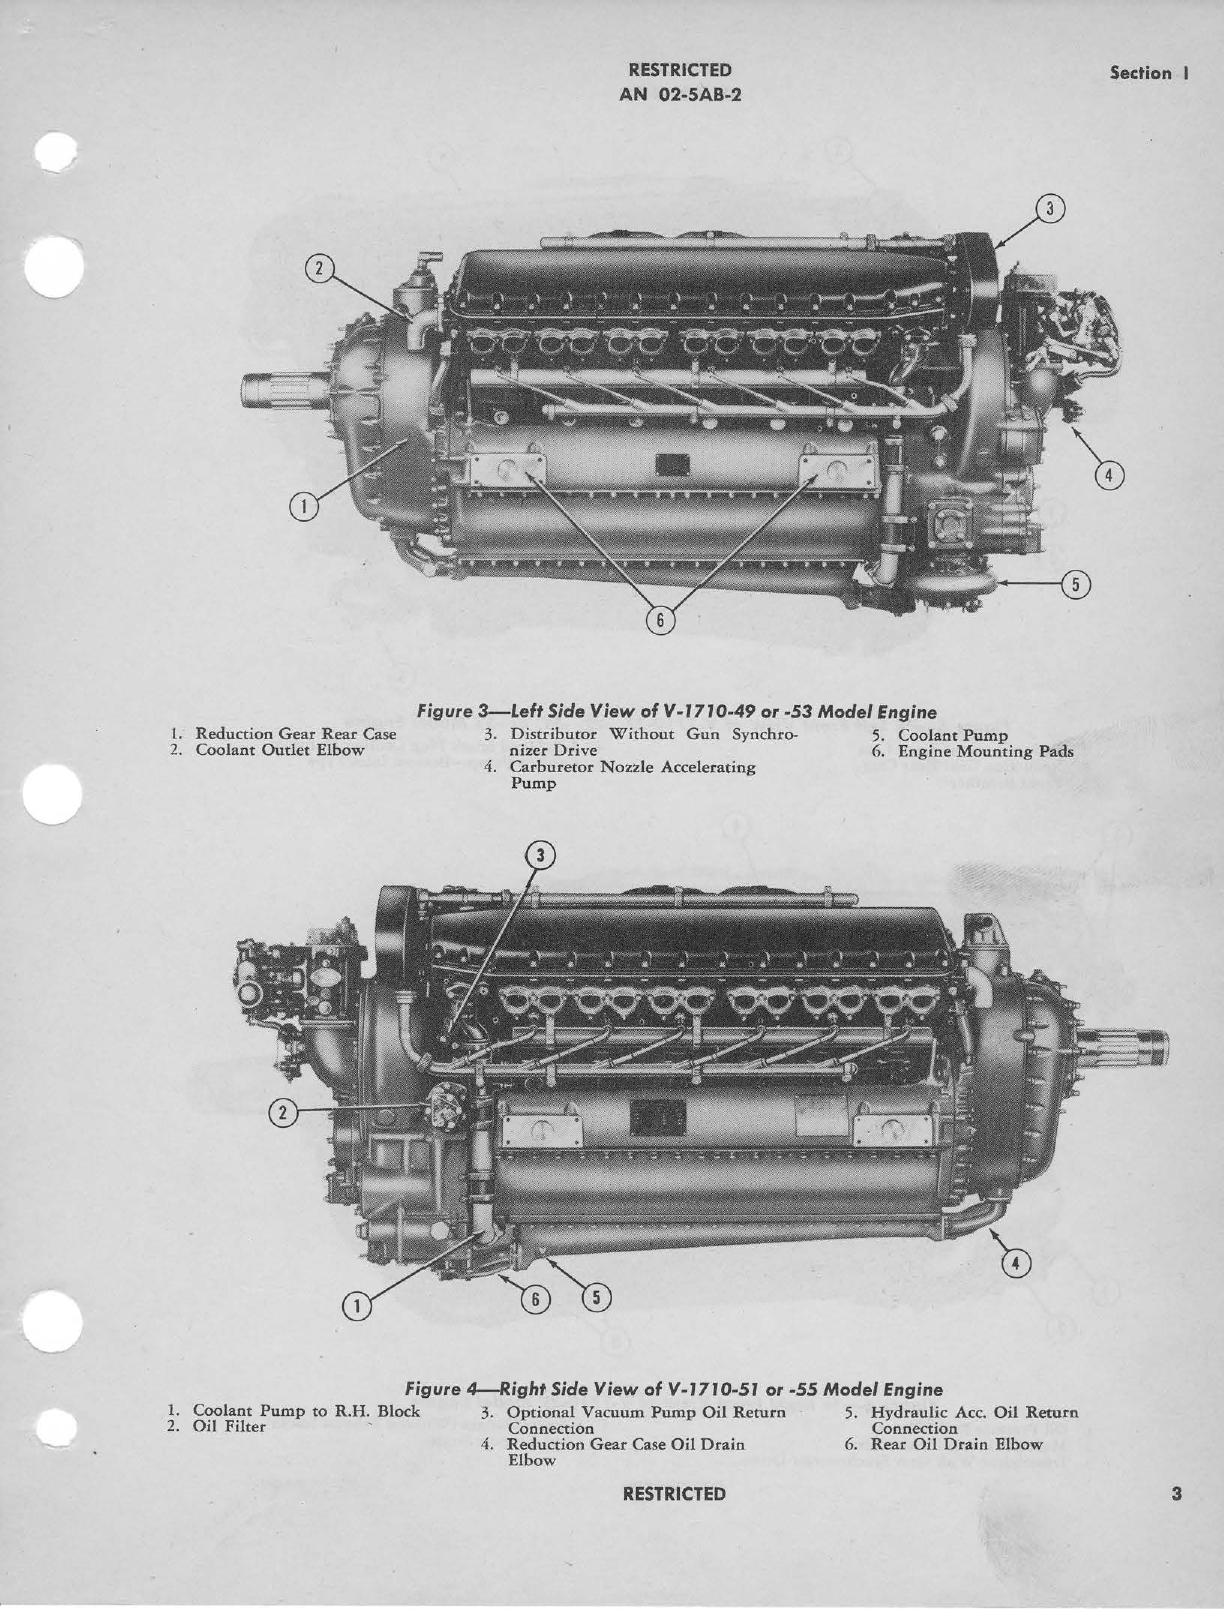 Sample page 7 from AirCorps Library document: Service Instructions for V-1710 Series Engines